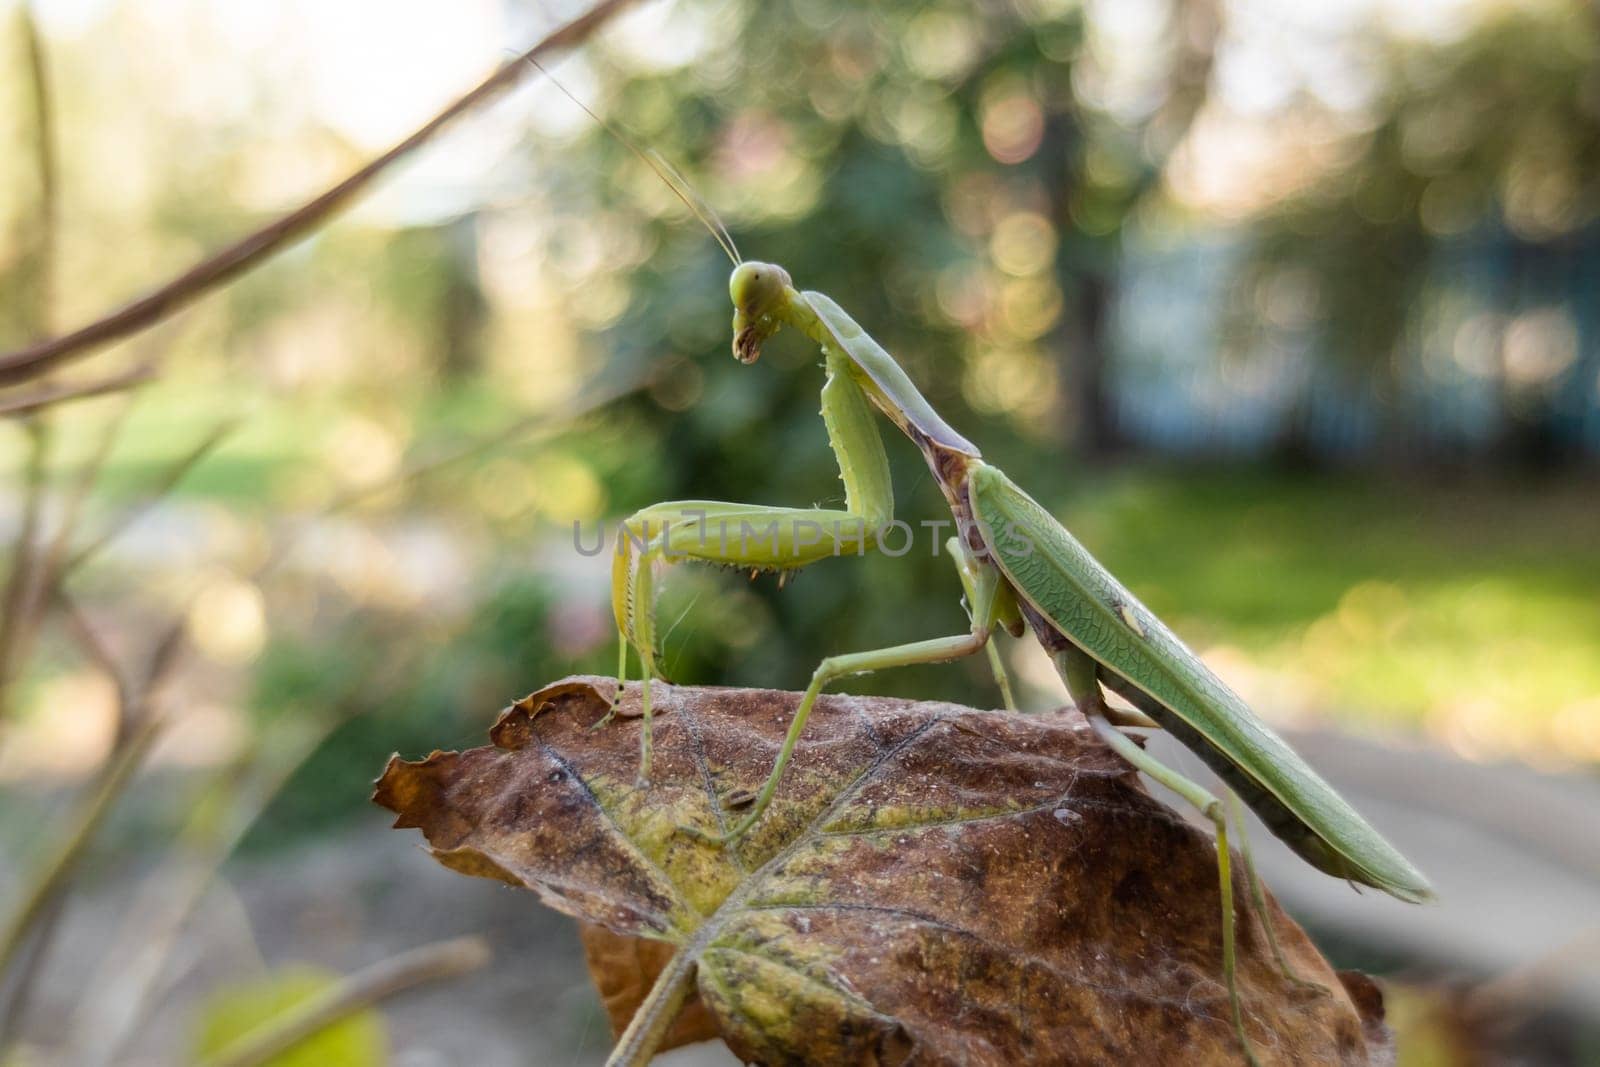 green praying mantis on a yellowed leaf close-up at sunny autumnal day by z1b